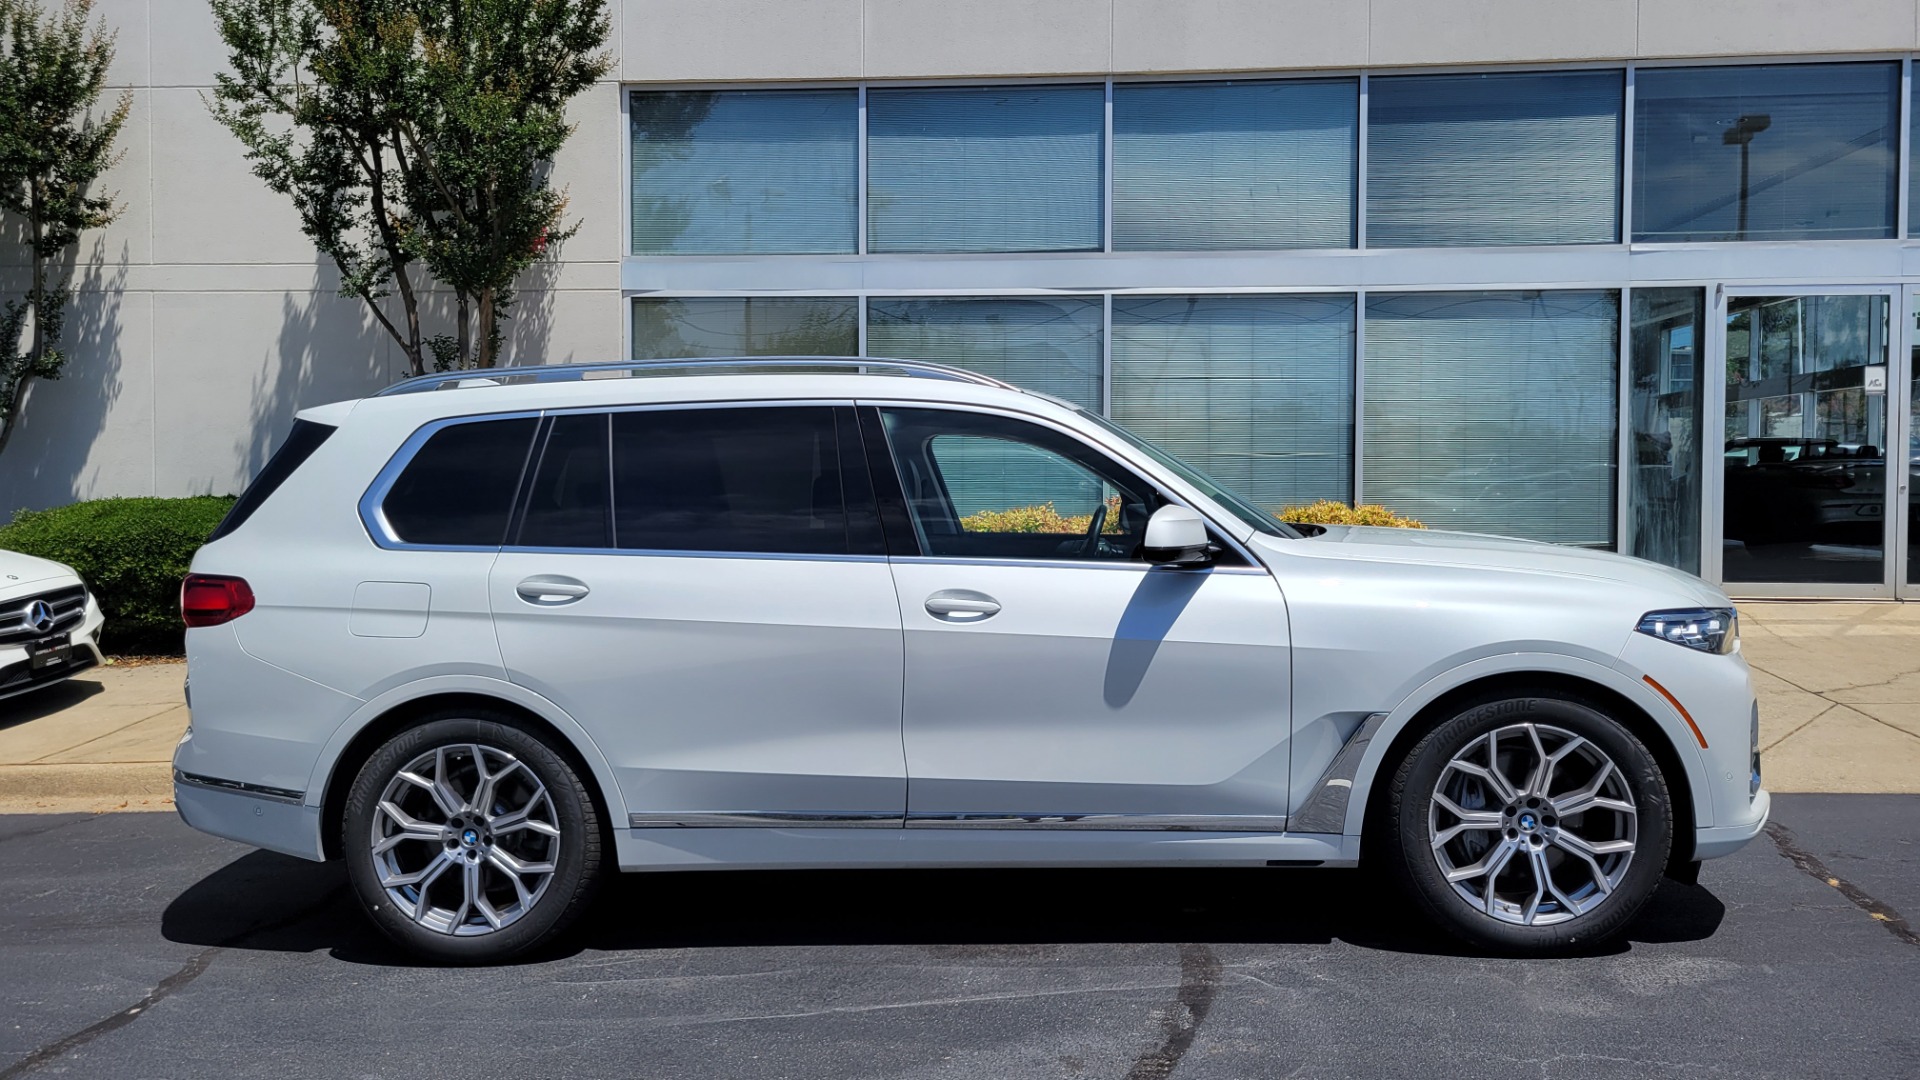 Used 2019 BMW X7 XDRIVE40I PREMIUM / NAV / HUD / PARK ASST PLUS / REMOTE START / 3D VIEW for sale $68,995 at Formula Imports in Charlotte NC 28227 6